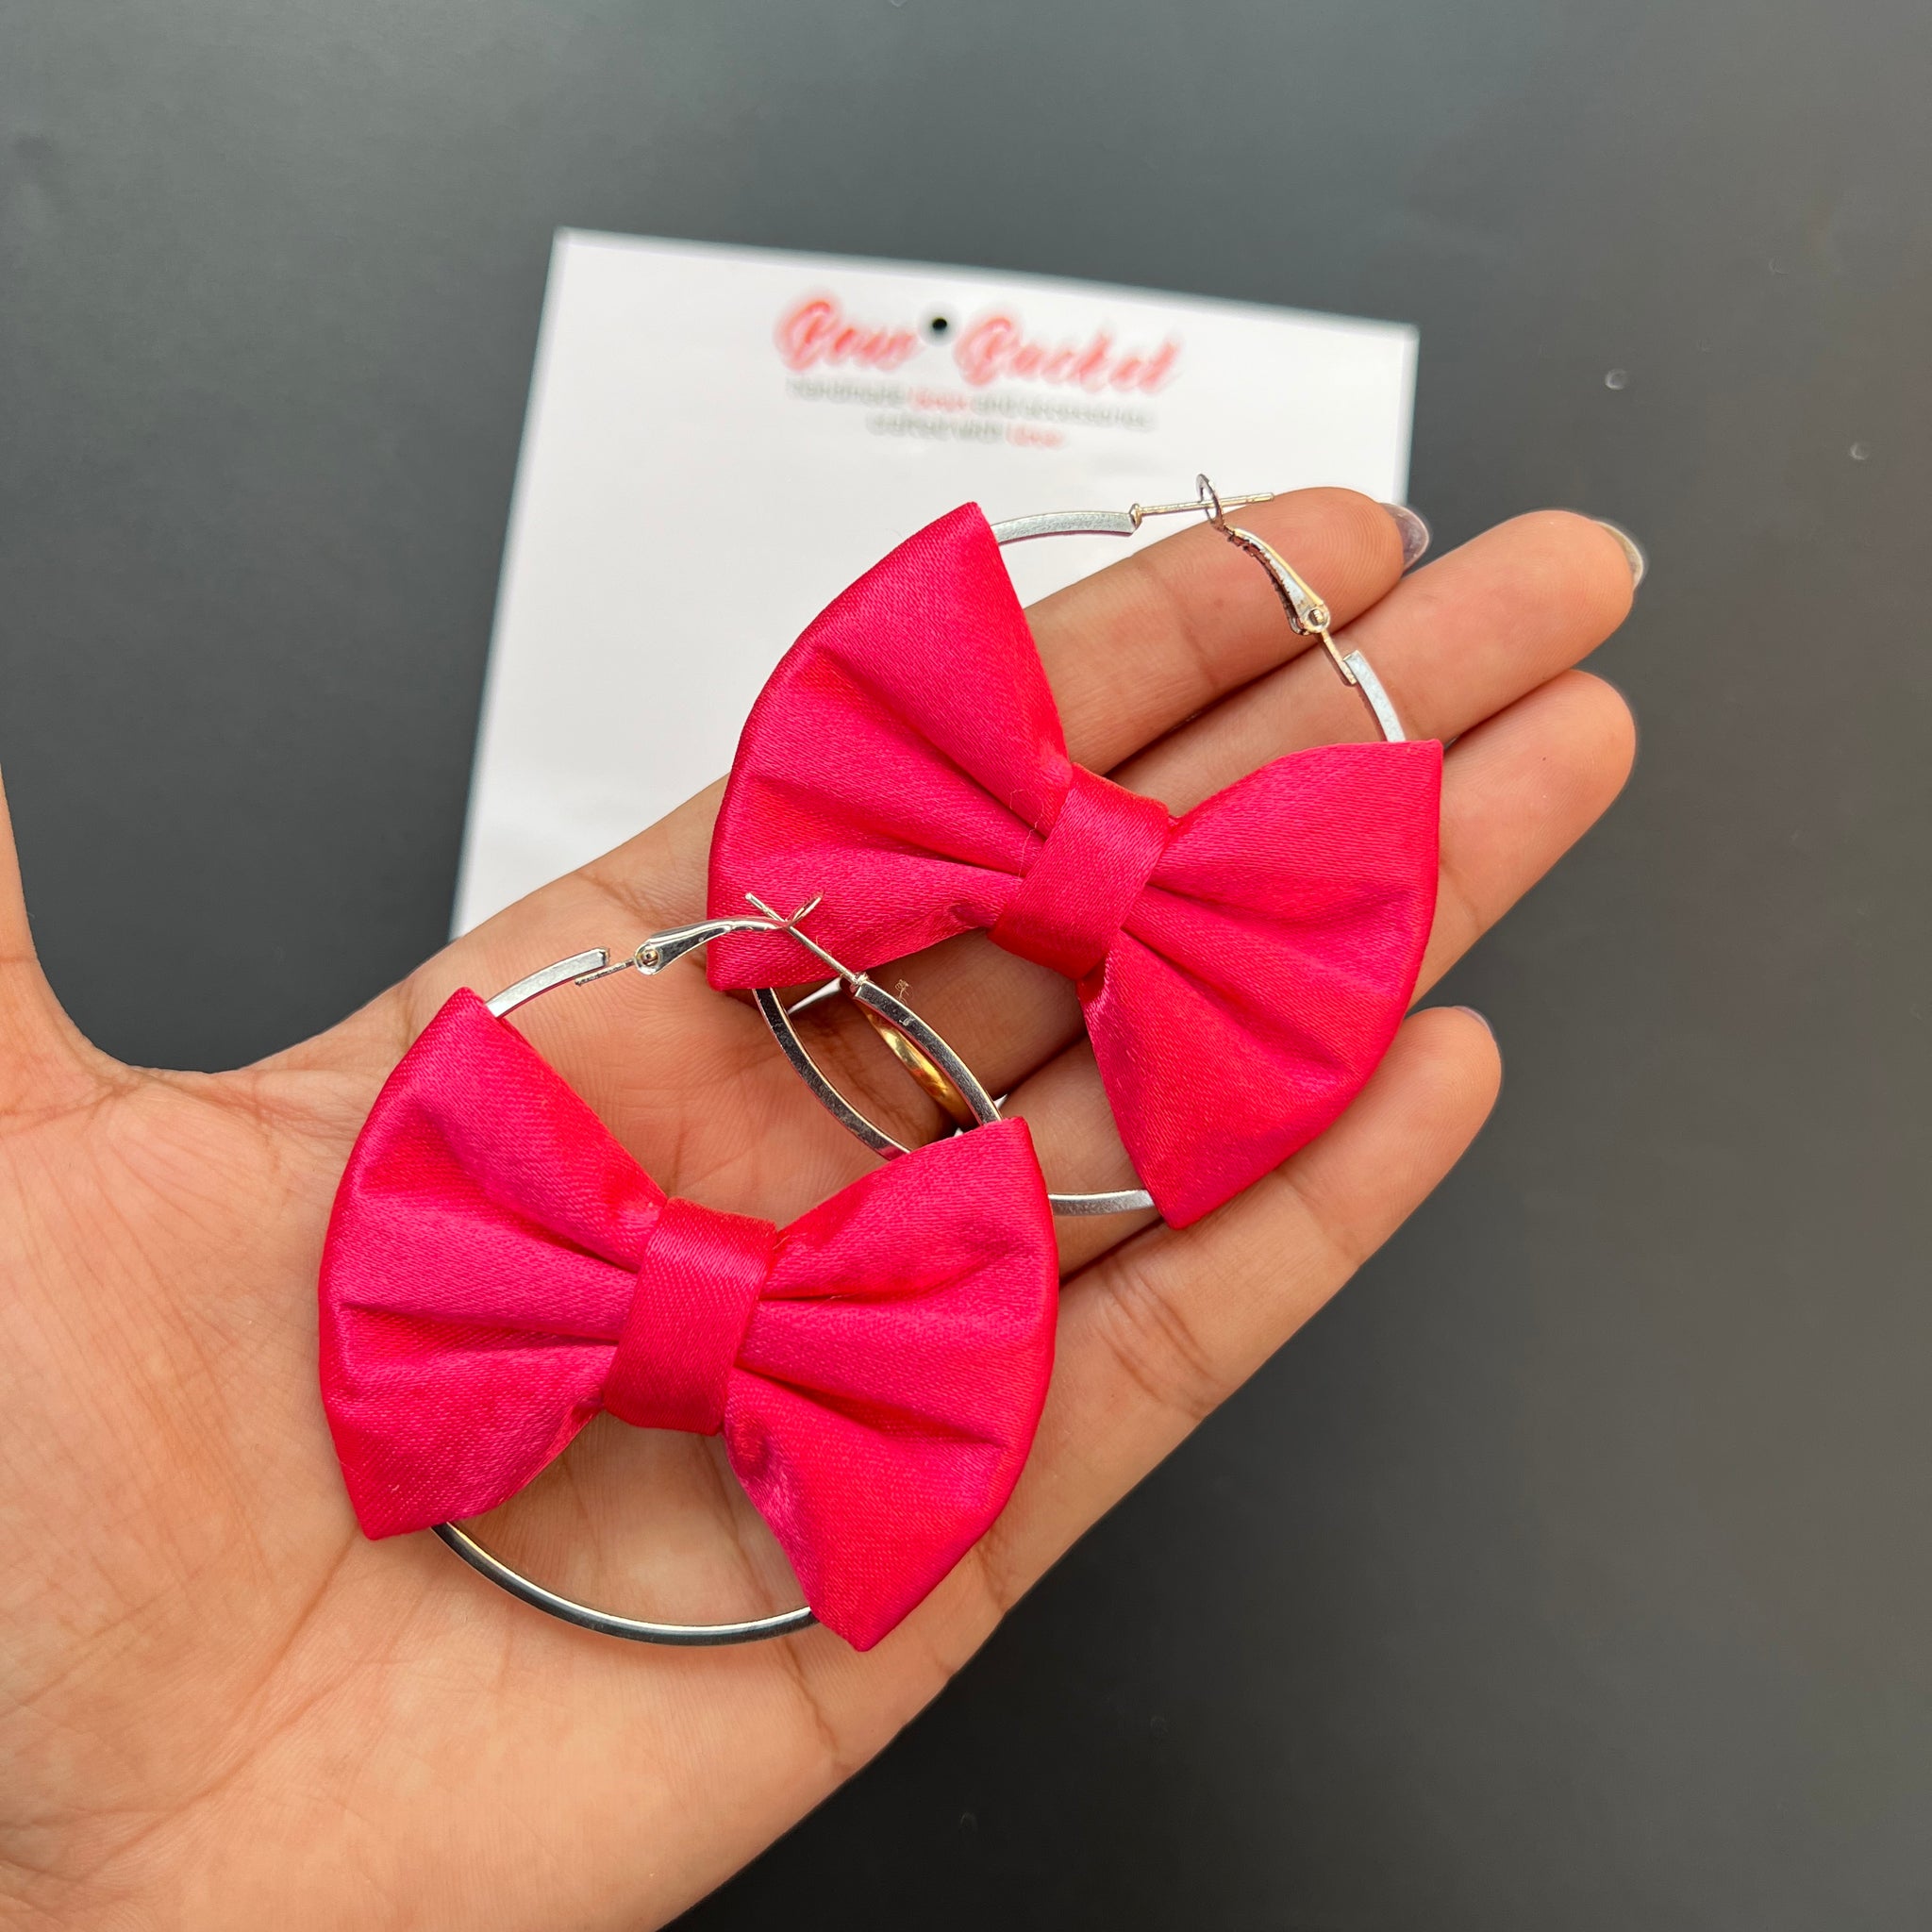 Pink satin bow earring